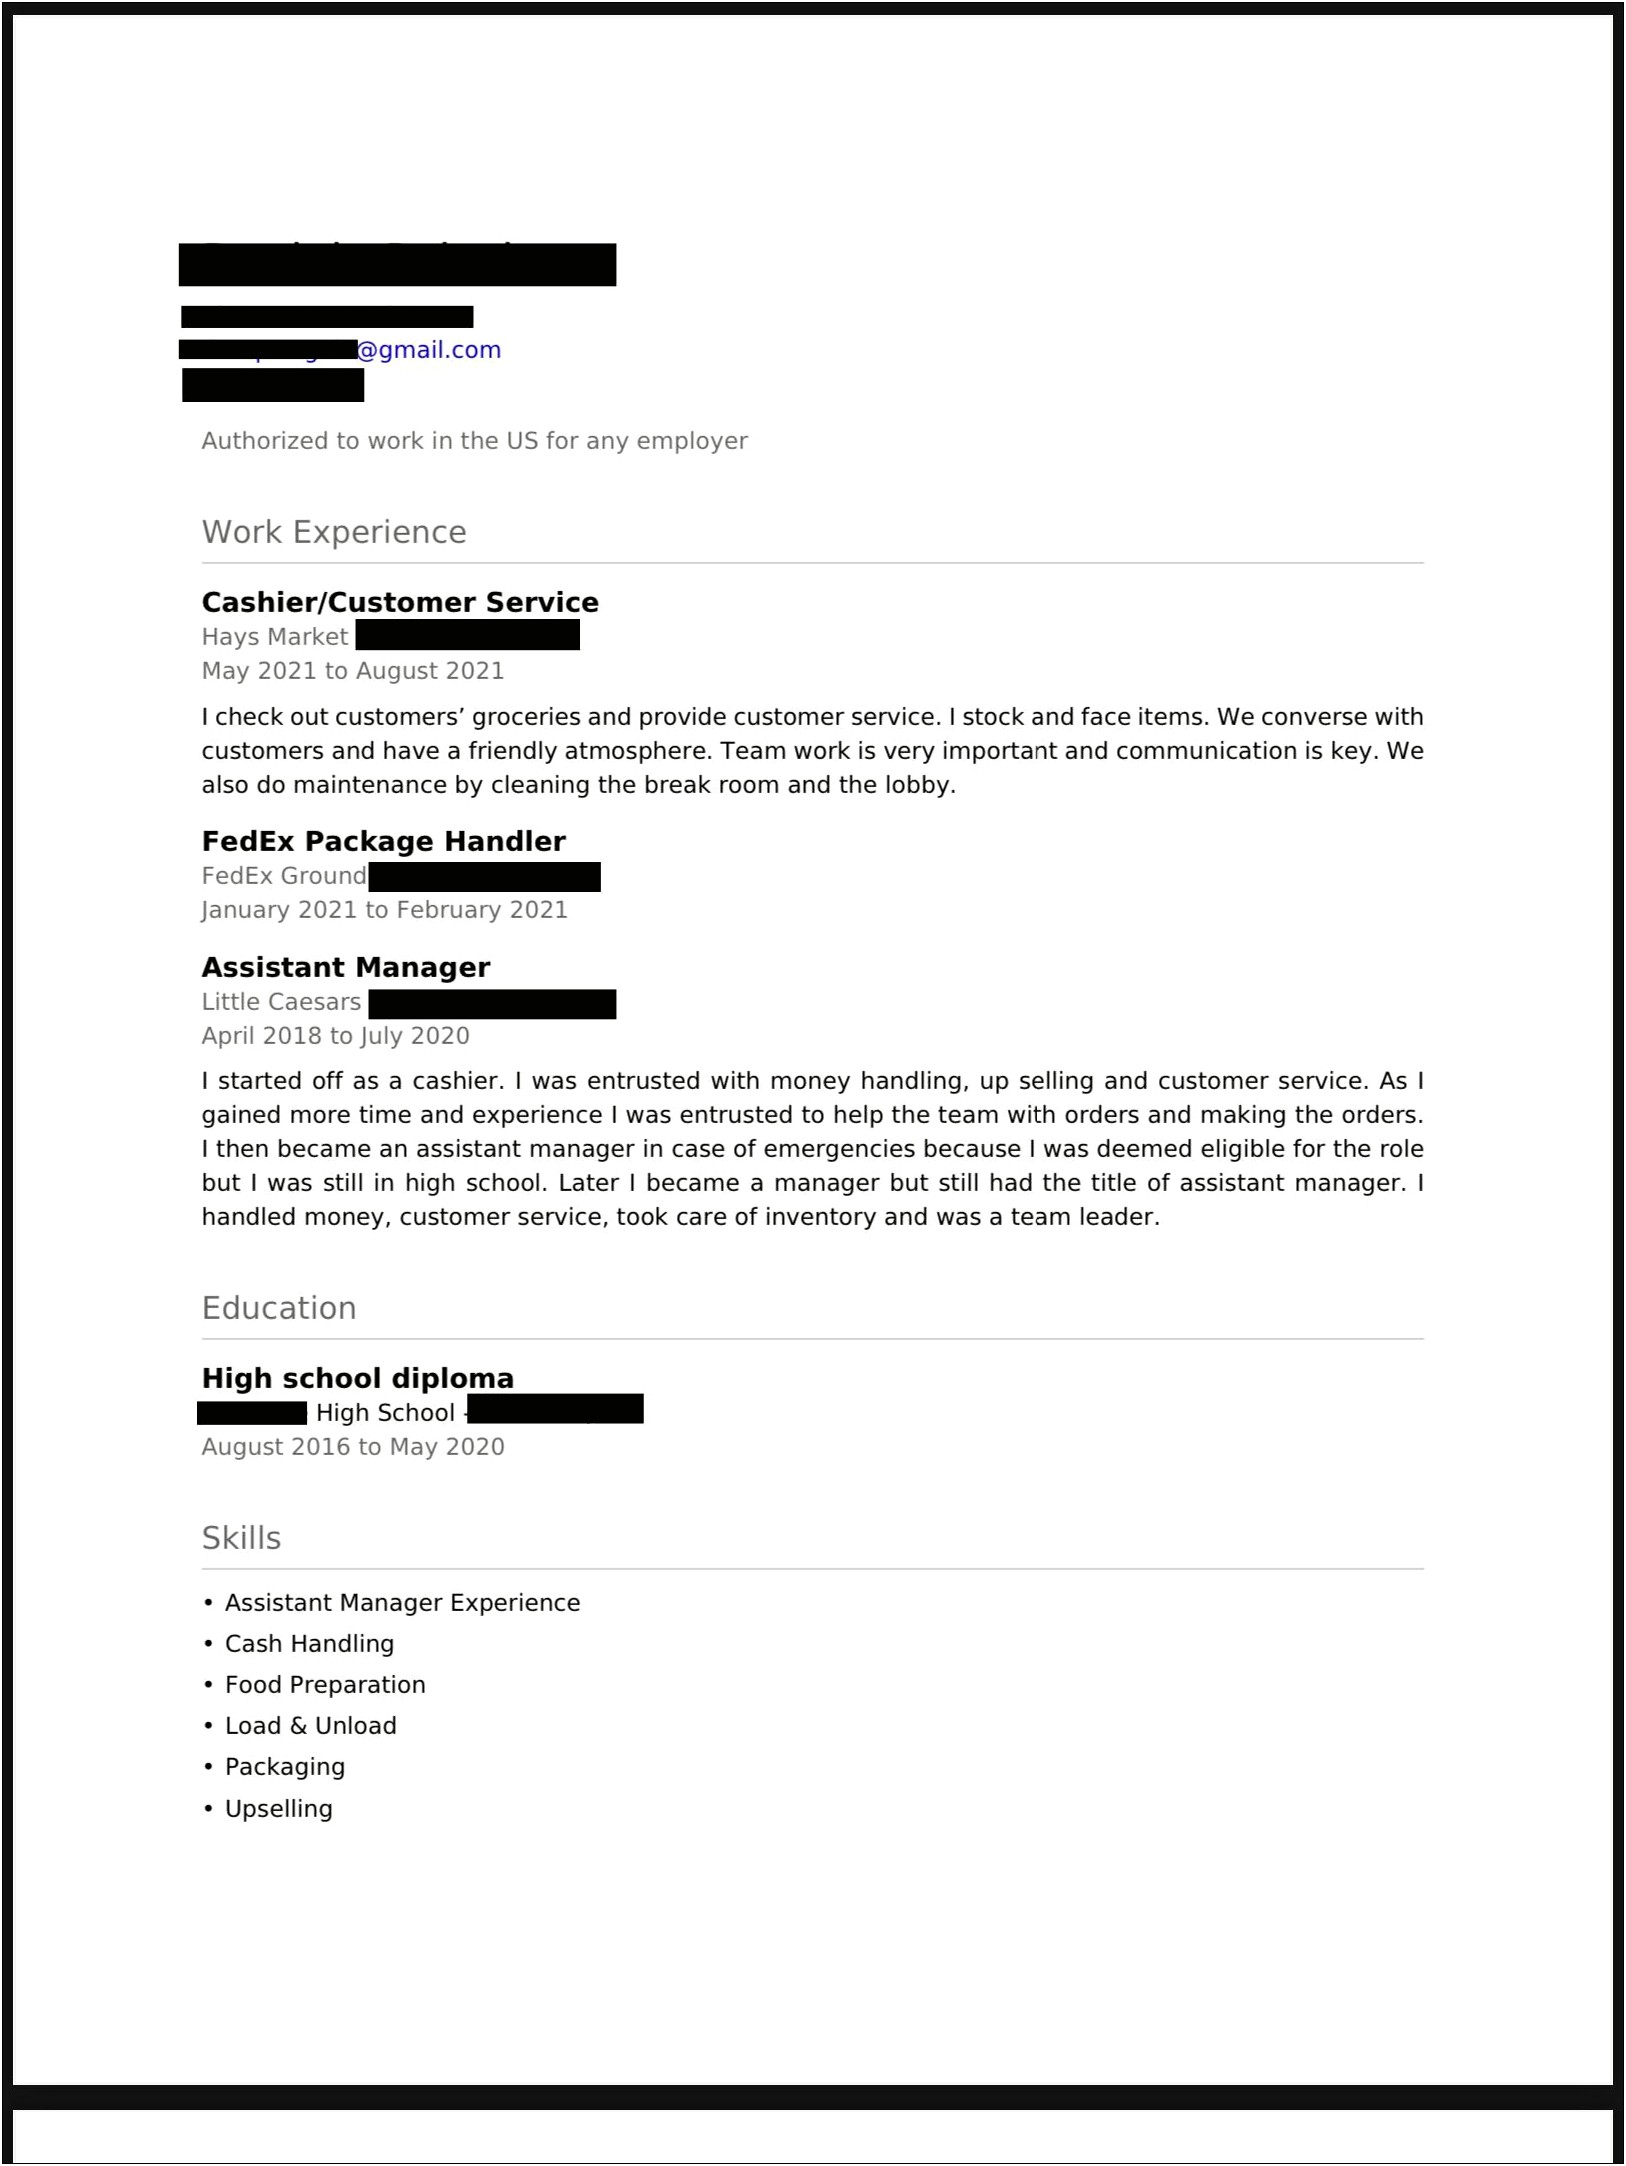 Package Handler Experience On A Resume